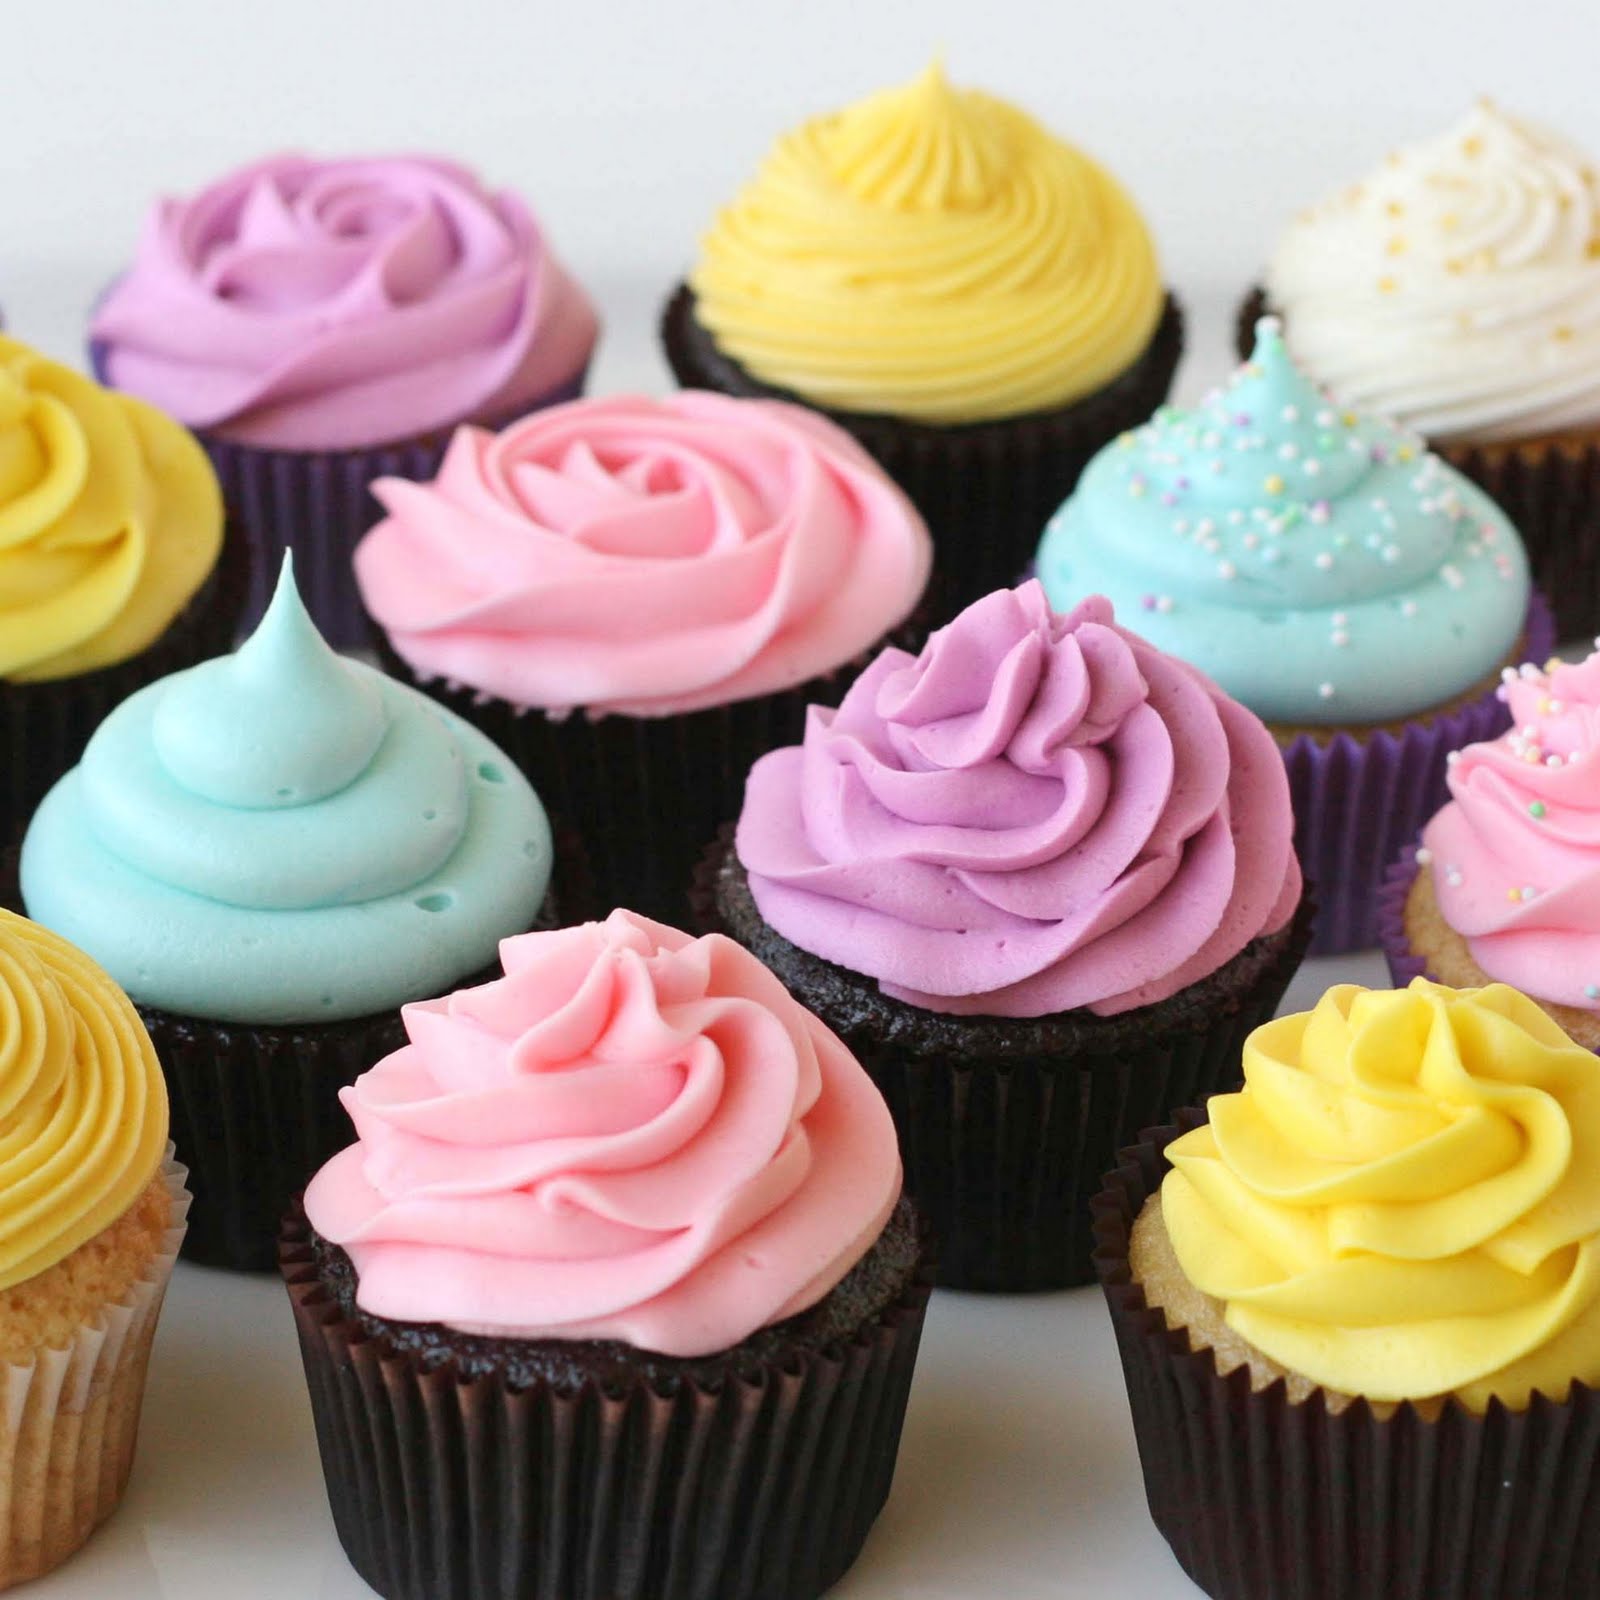 vanilla cupcakes with buttercream frosting